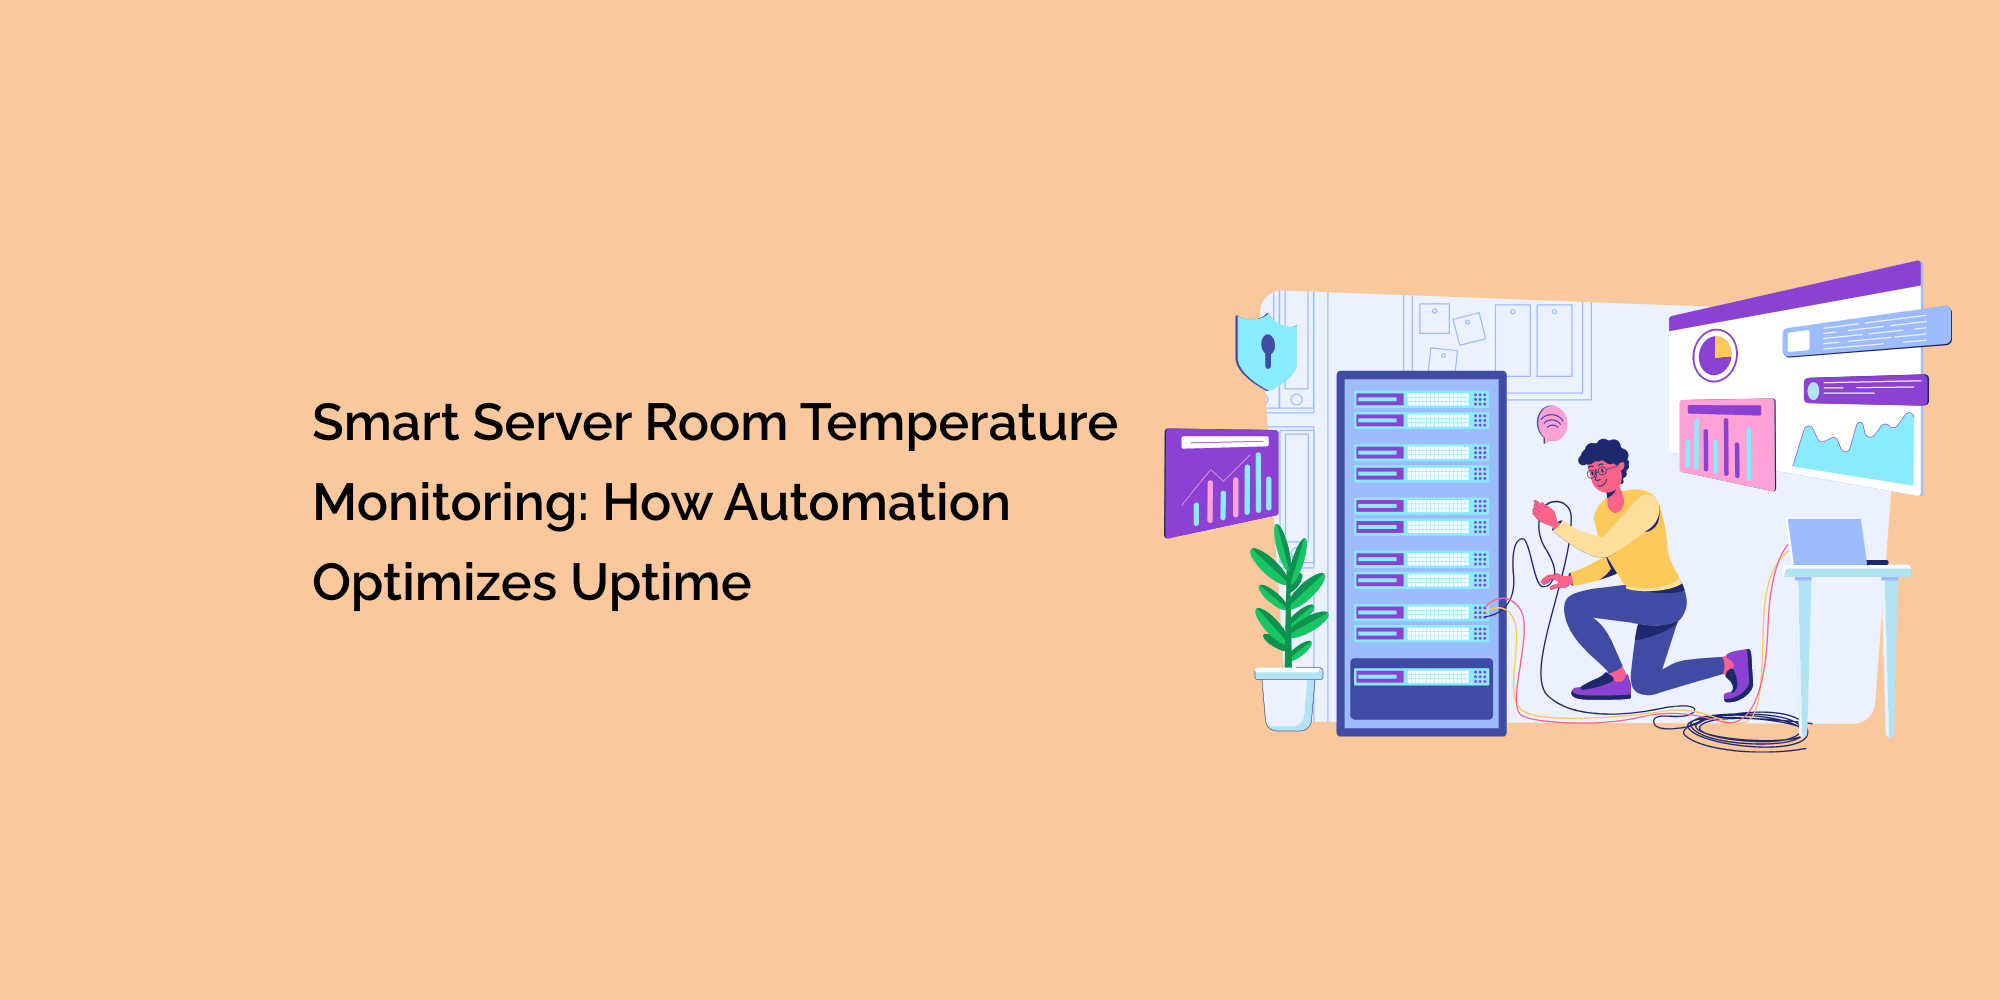 Smart Server Room Temperature Monitoring: How Automation Optimizes Uptime